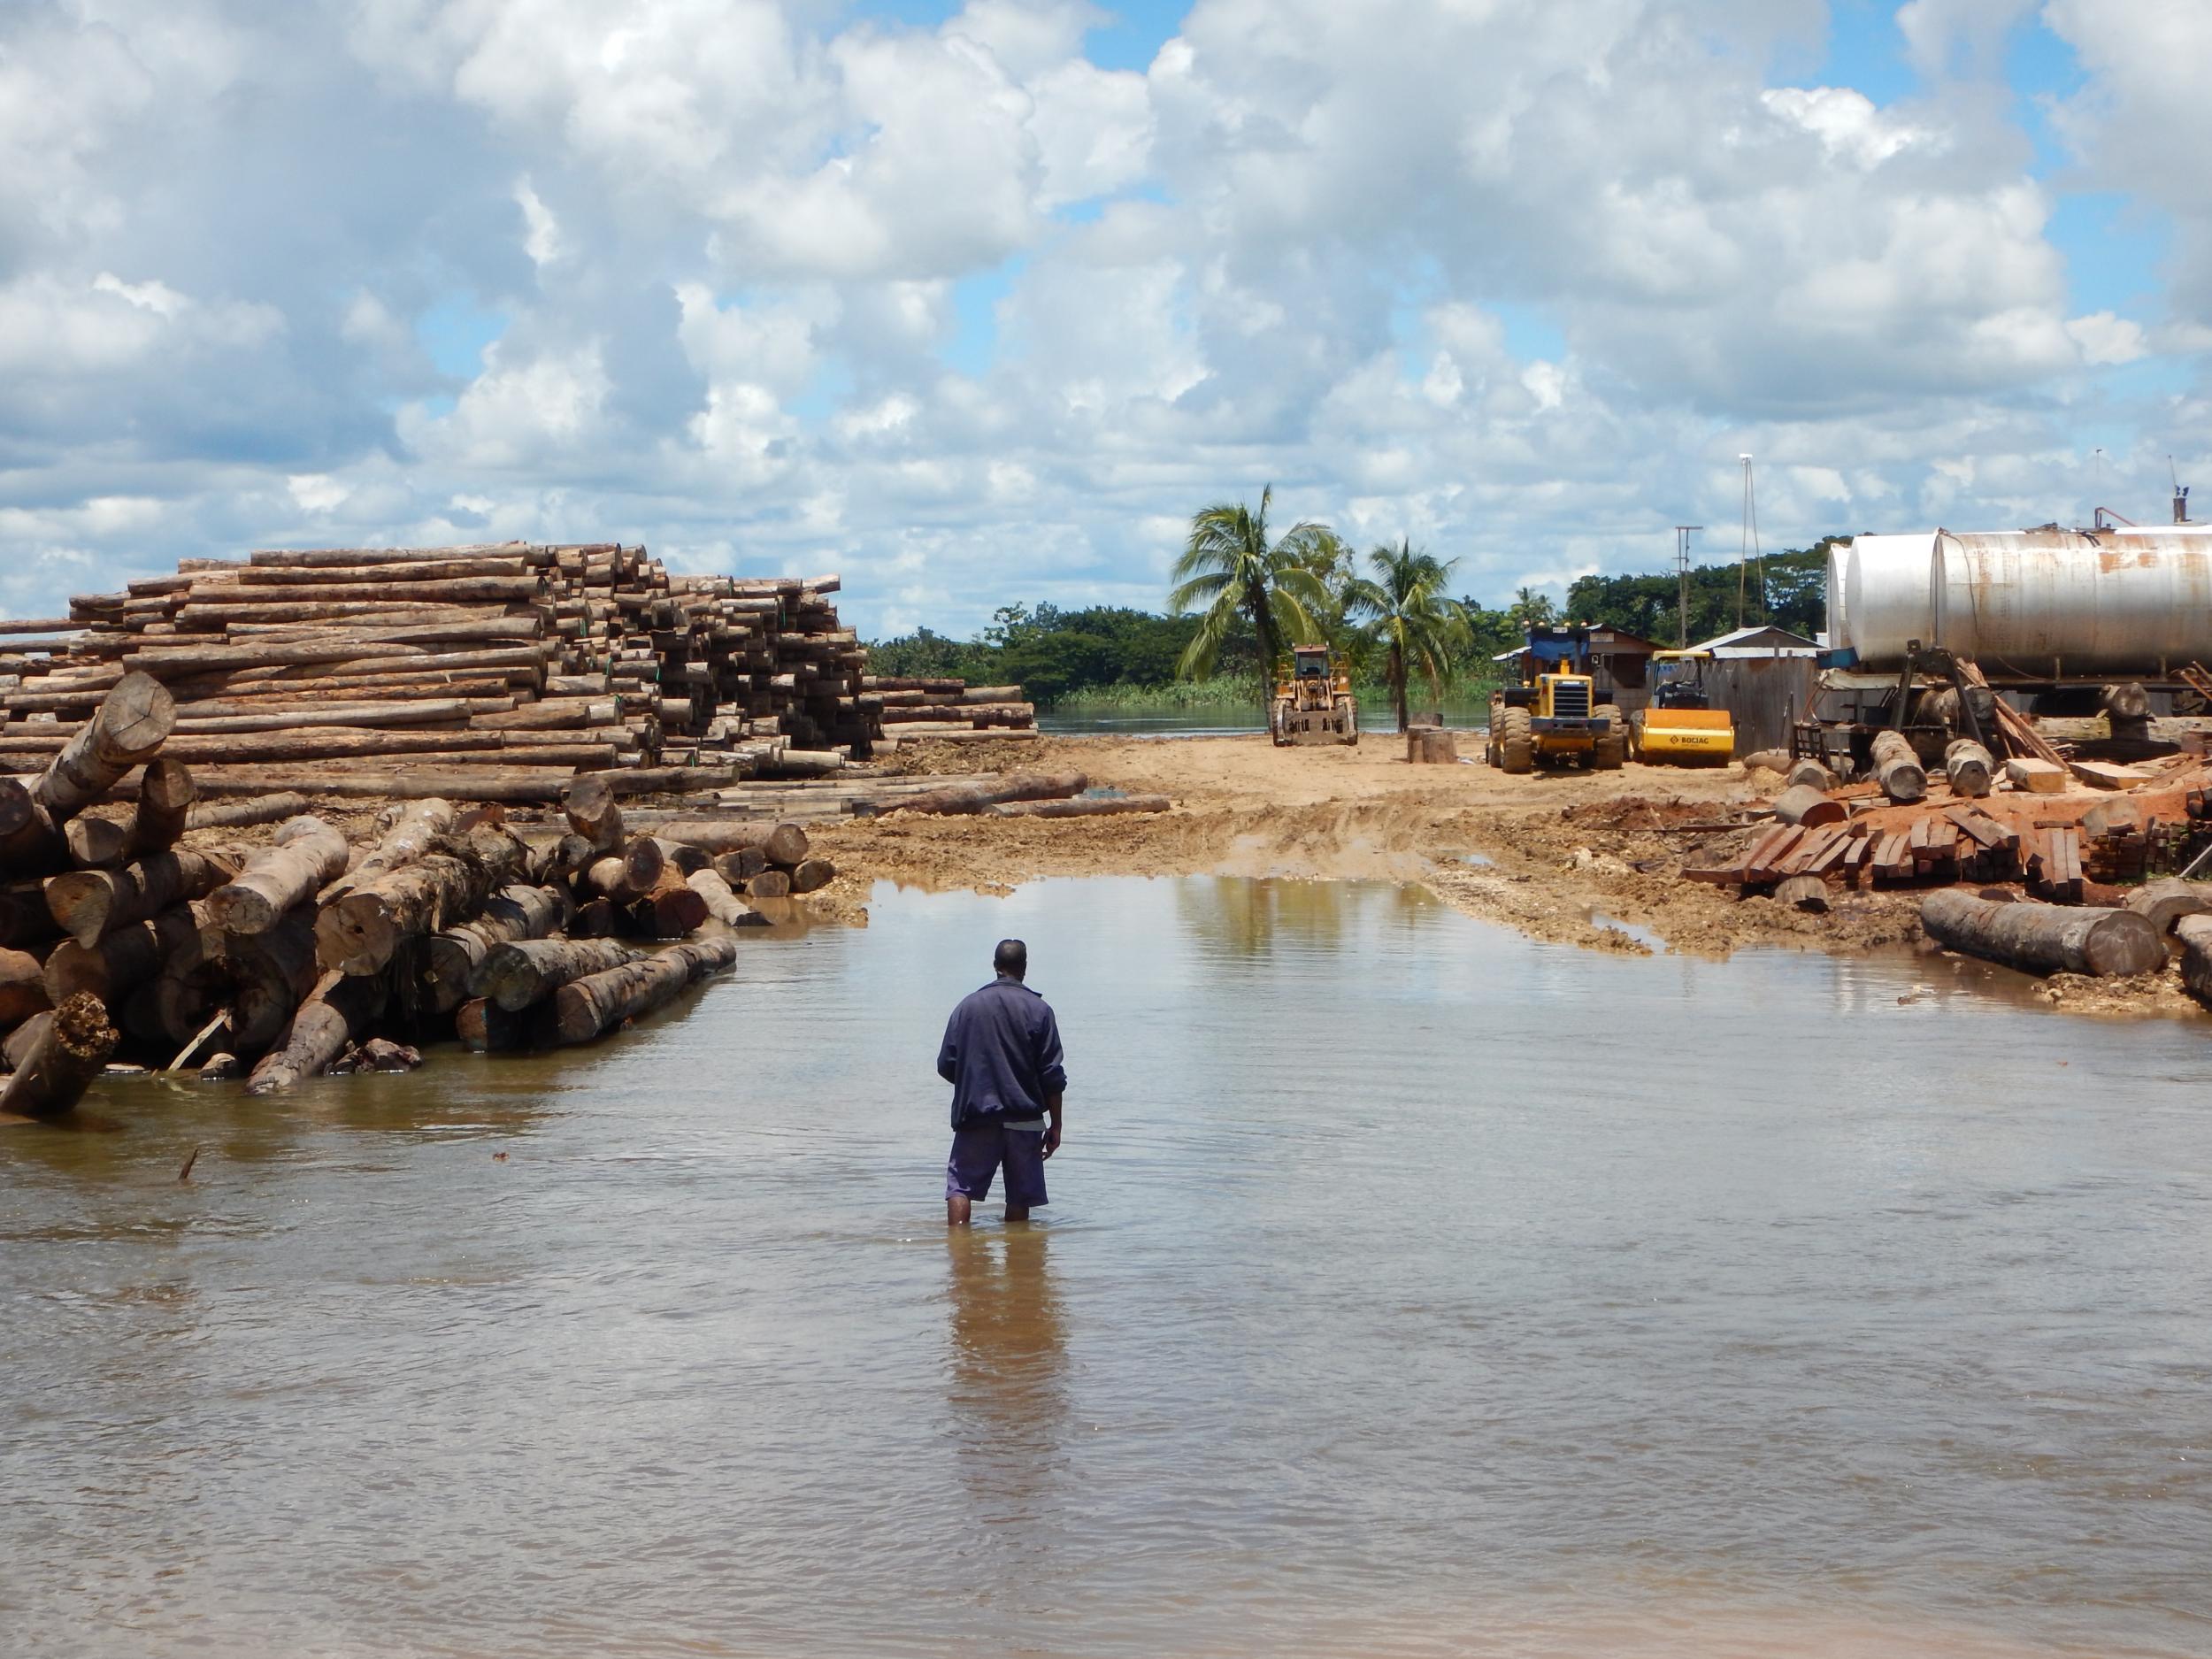 Access to log storage at Sepik River, where logs are loaded on barges carrying them to ships anchored in the Sepik River mouth